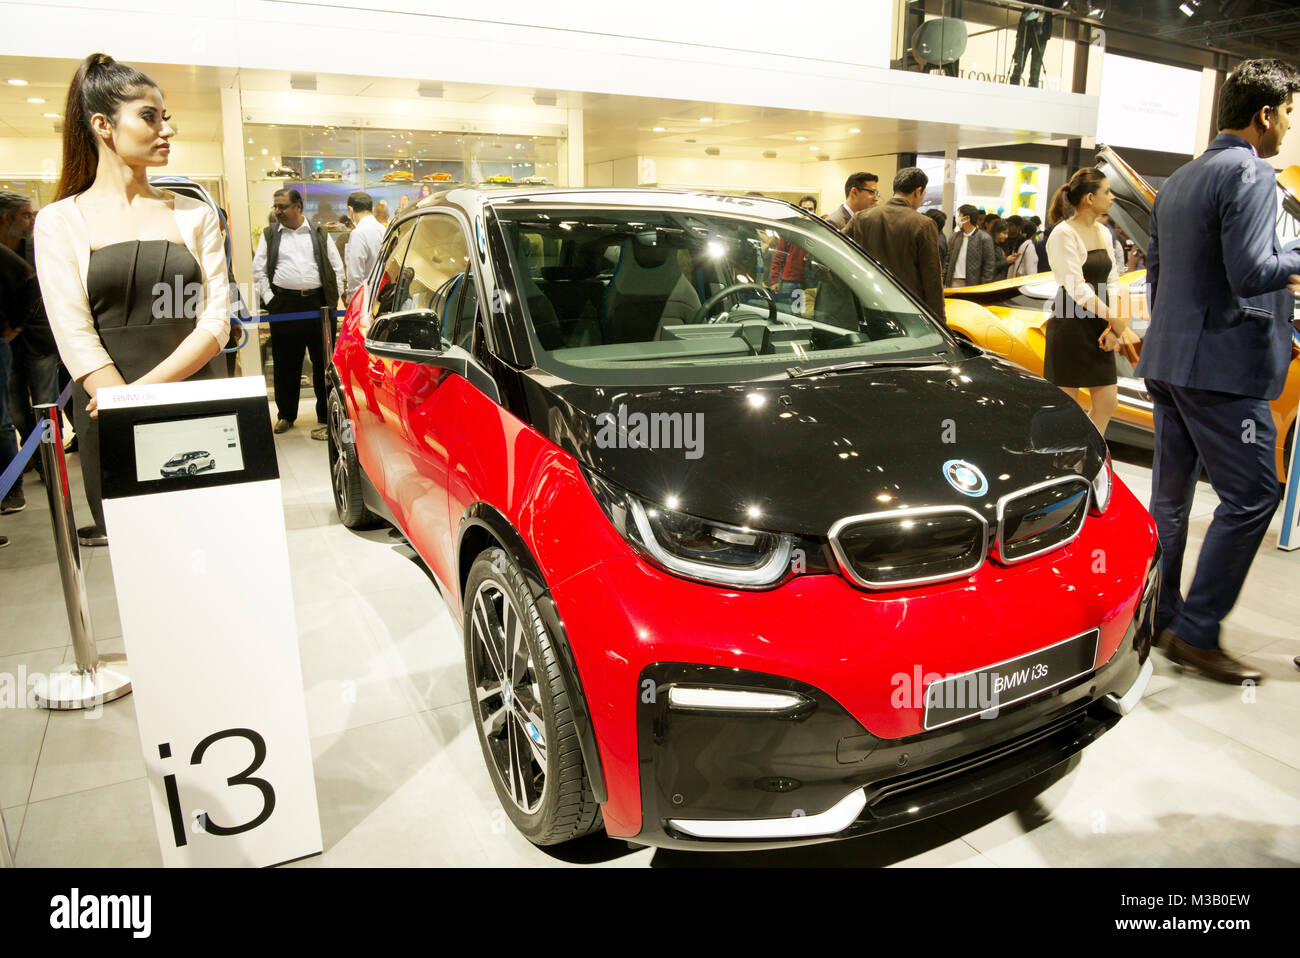 Greater Noida, India. 9th February 2018. BMW i3s car is on display at the Auto Expo 2018 at India Expo Mart in Greater Noida, India. The Auto Expo is a biennial event and is being held during 9th to 14th February 2018. Credit: Karunesh Johri/Alamy Live News. Stock Photo